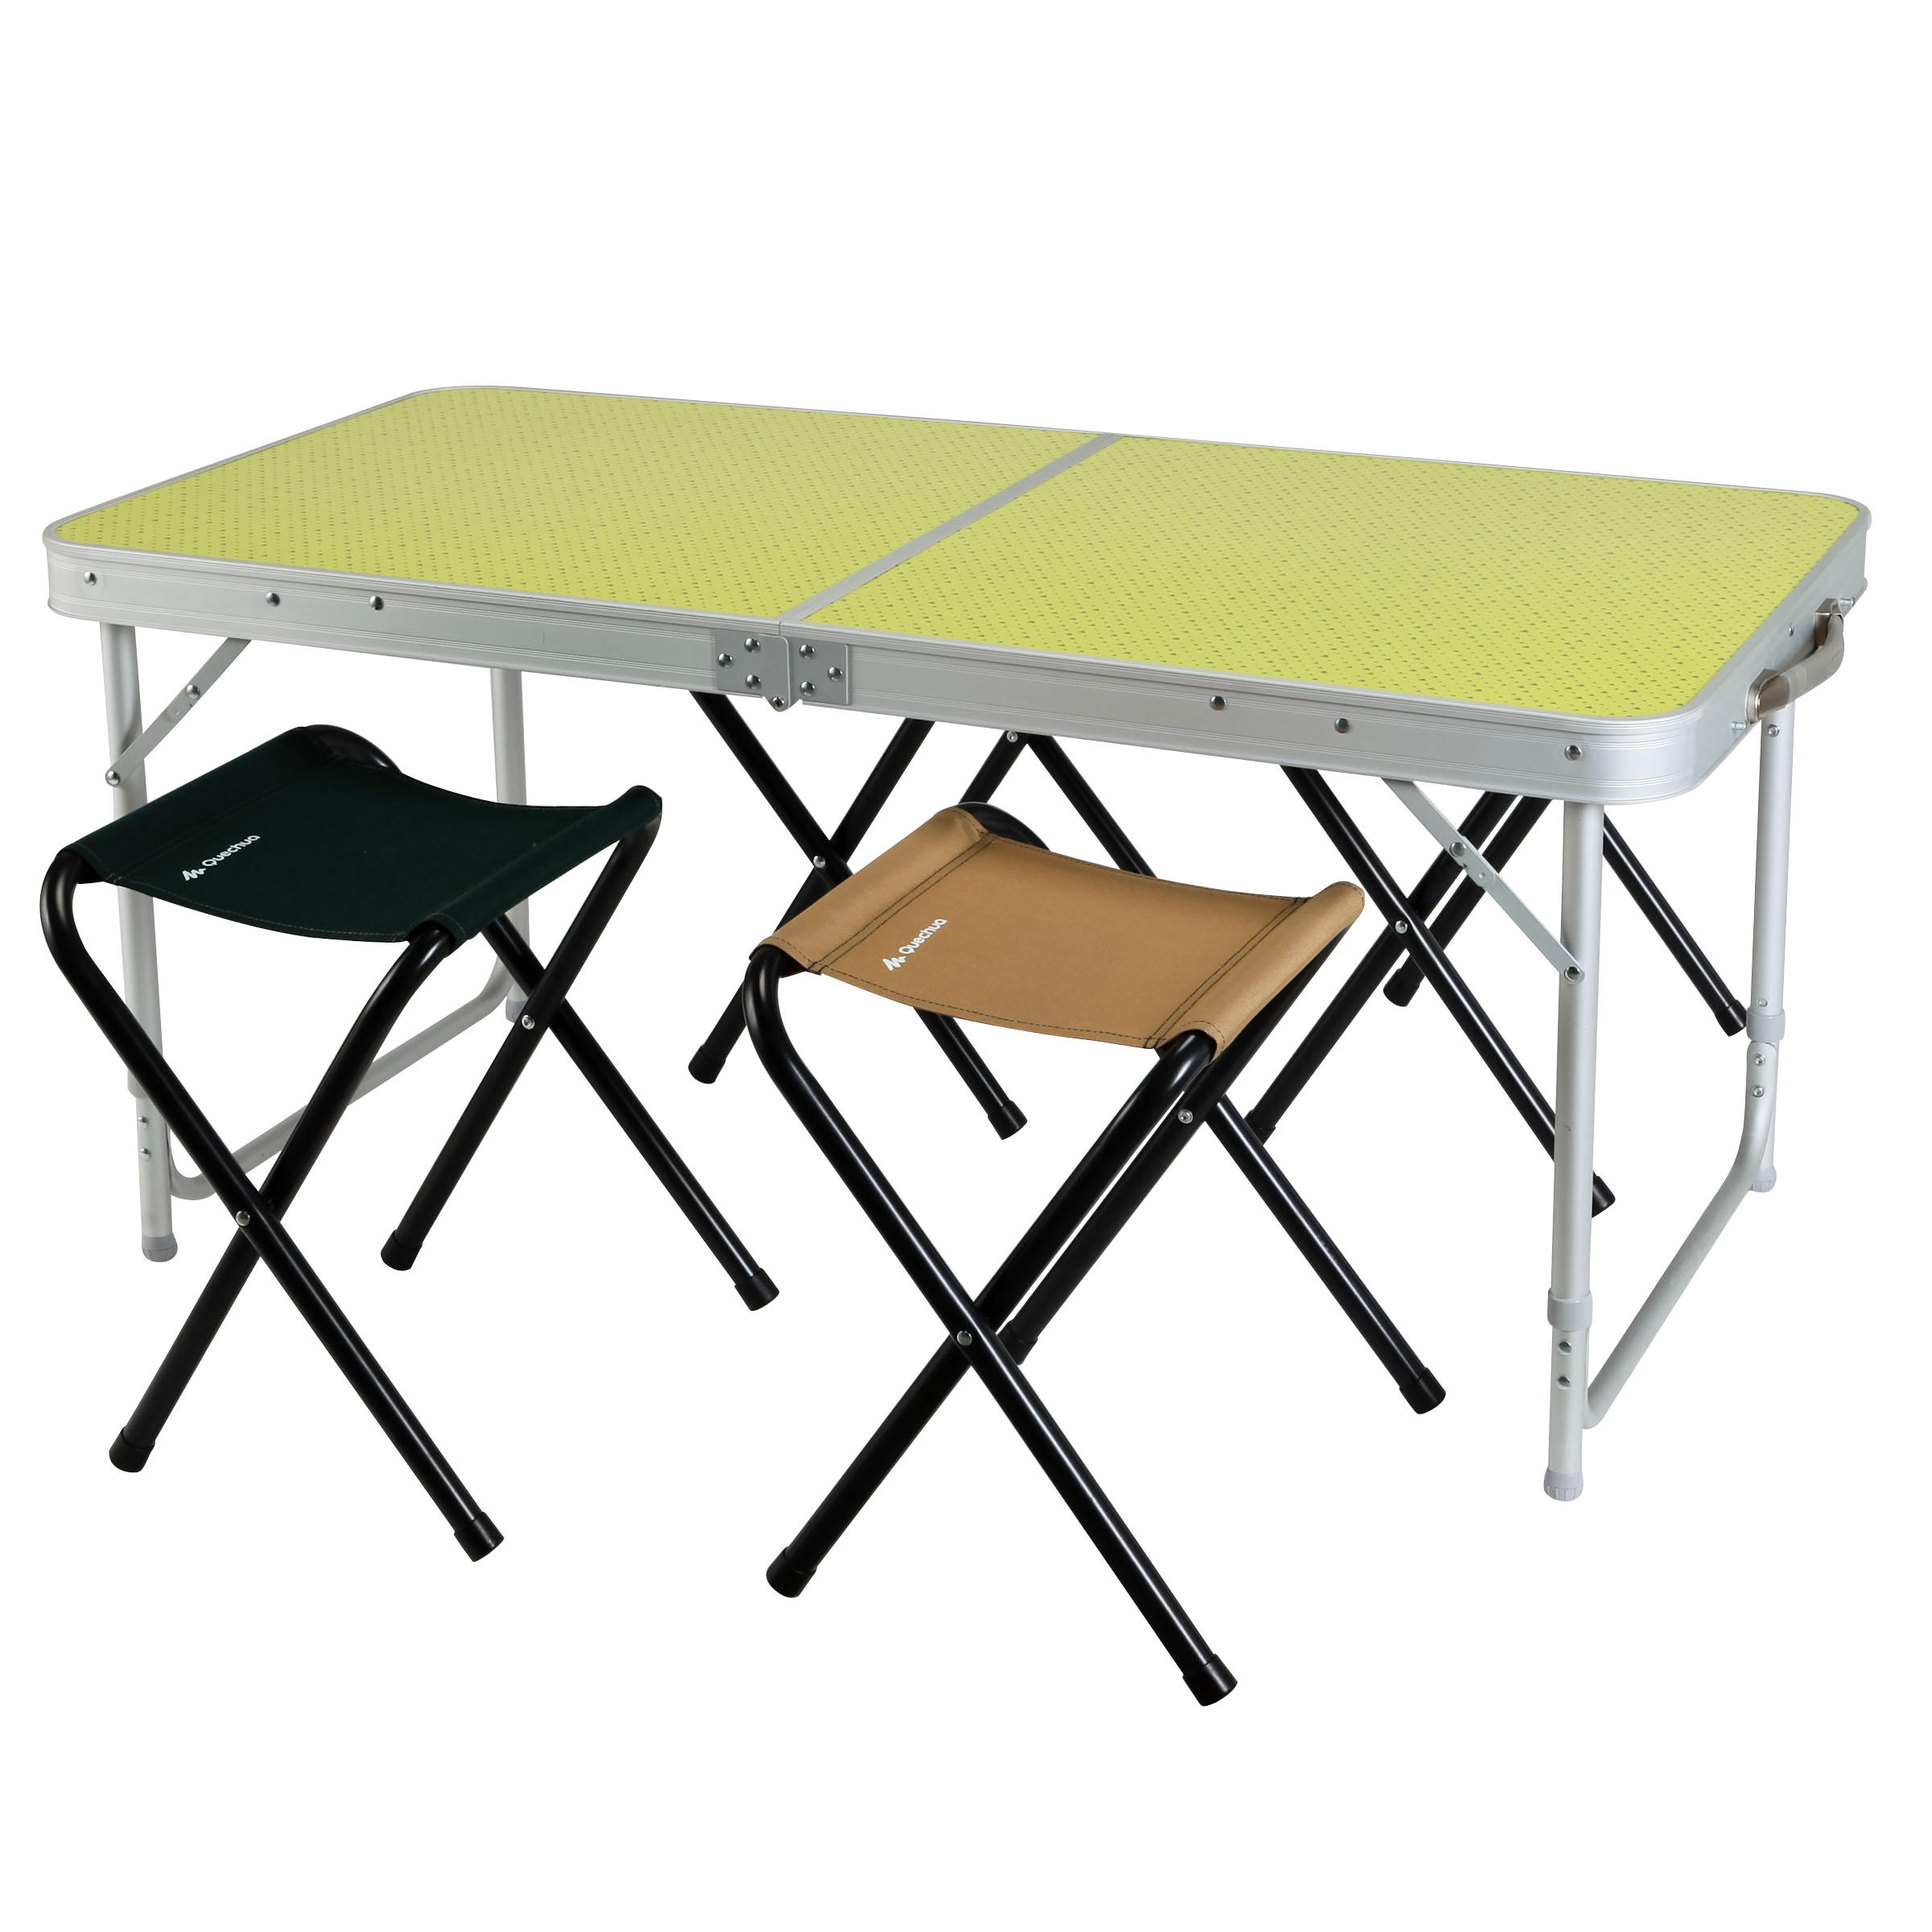 QUECHUA Camping Furniture 4-Person Table with 4 Seats - Green